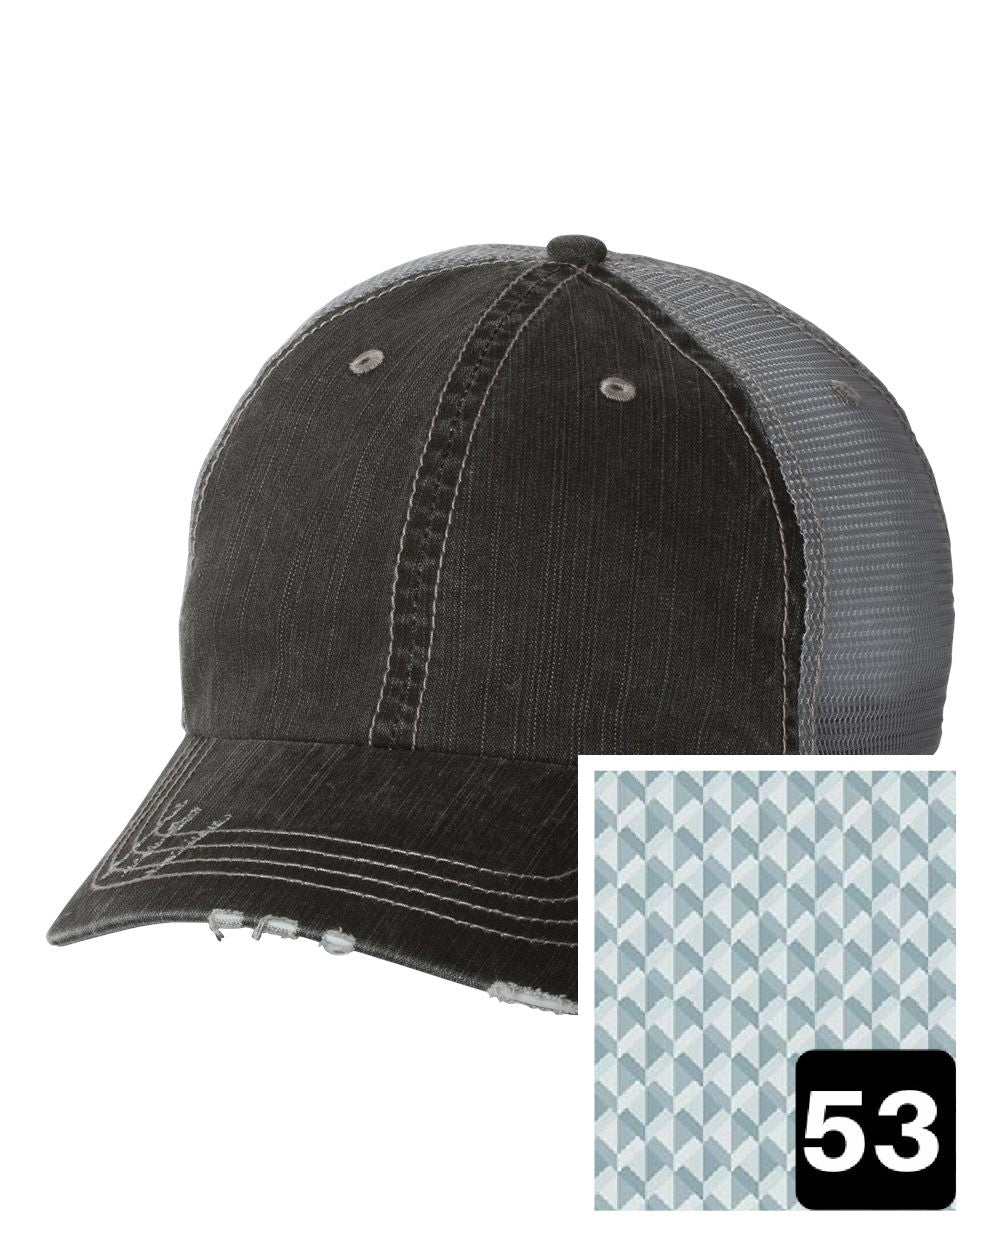 gray distressed trucker hat with multi-color stripe fabric state of Illinois